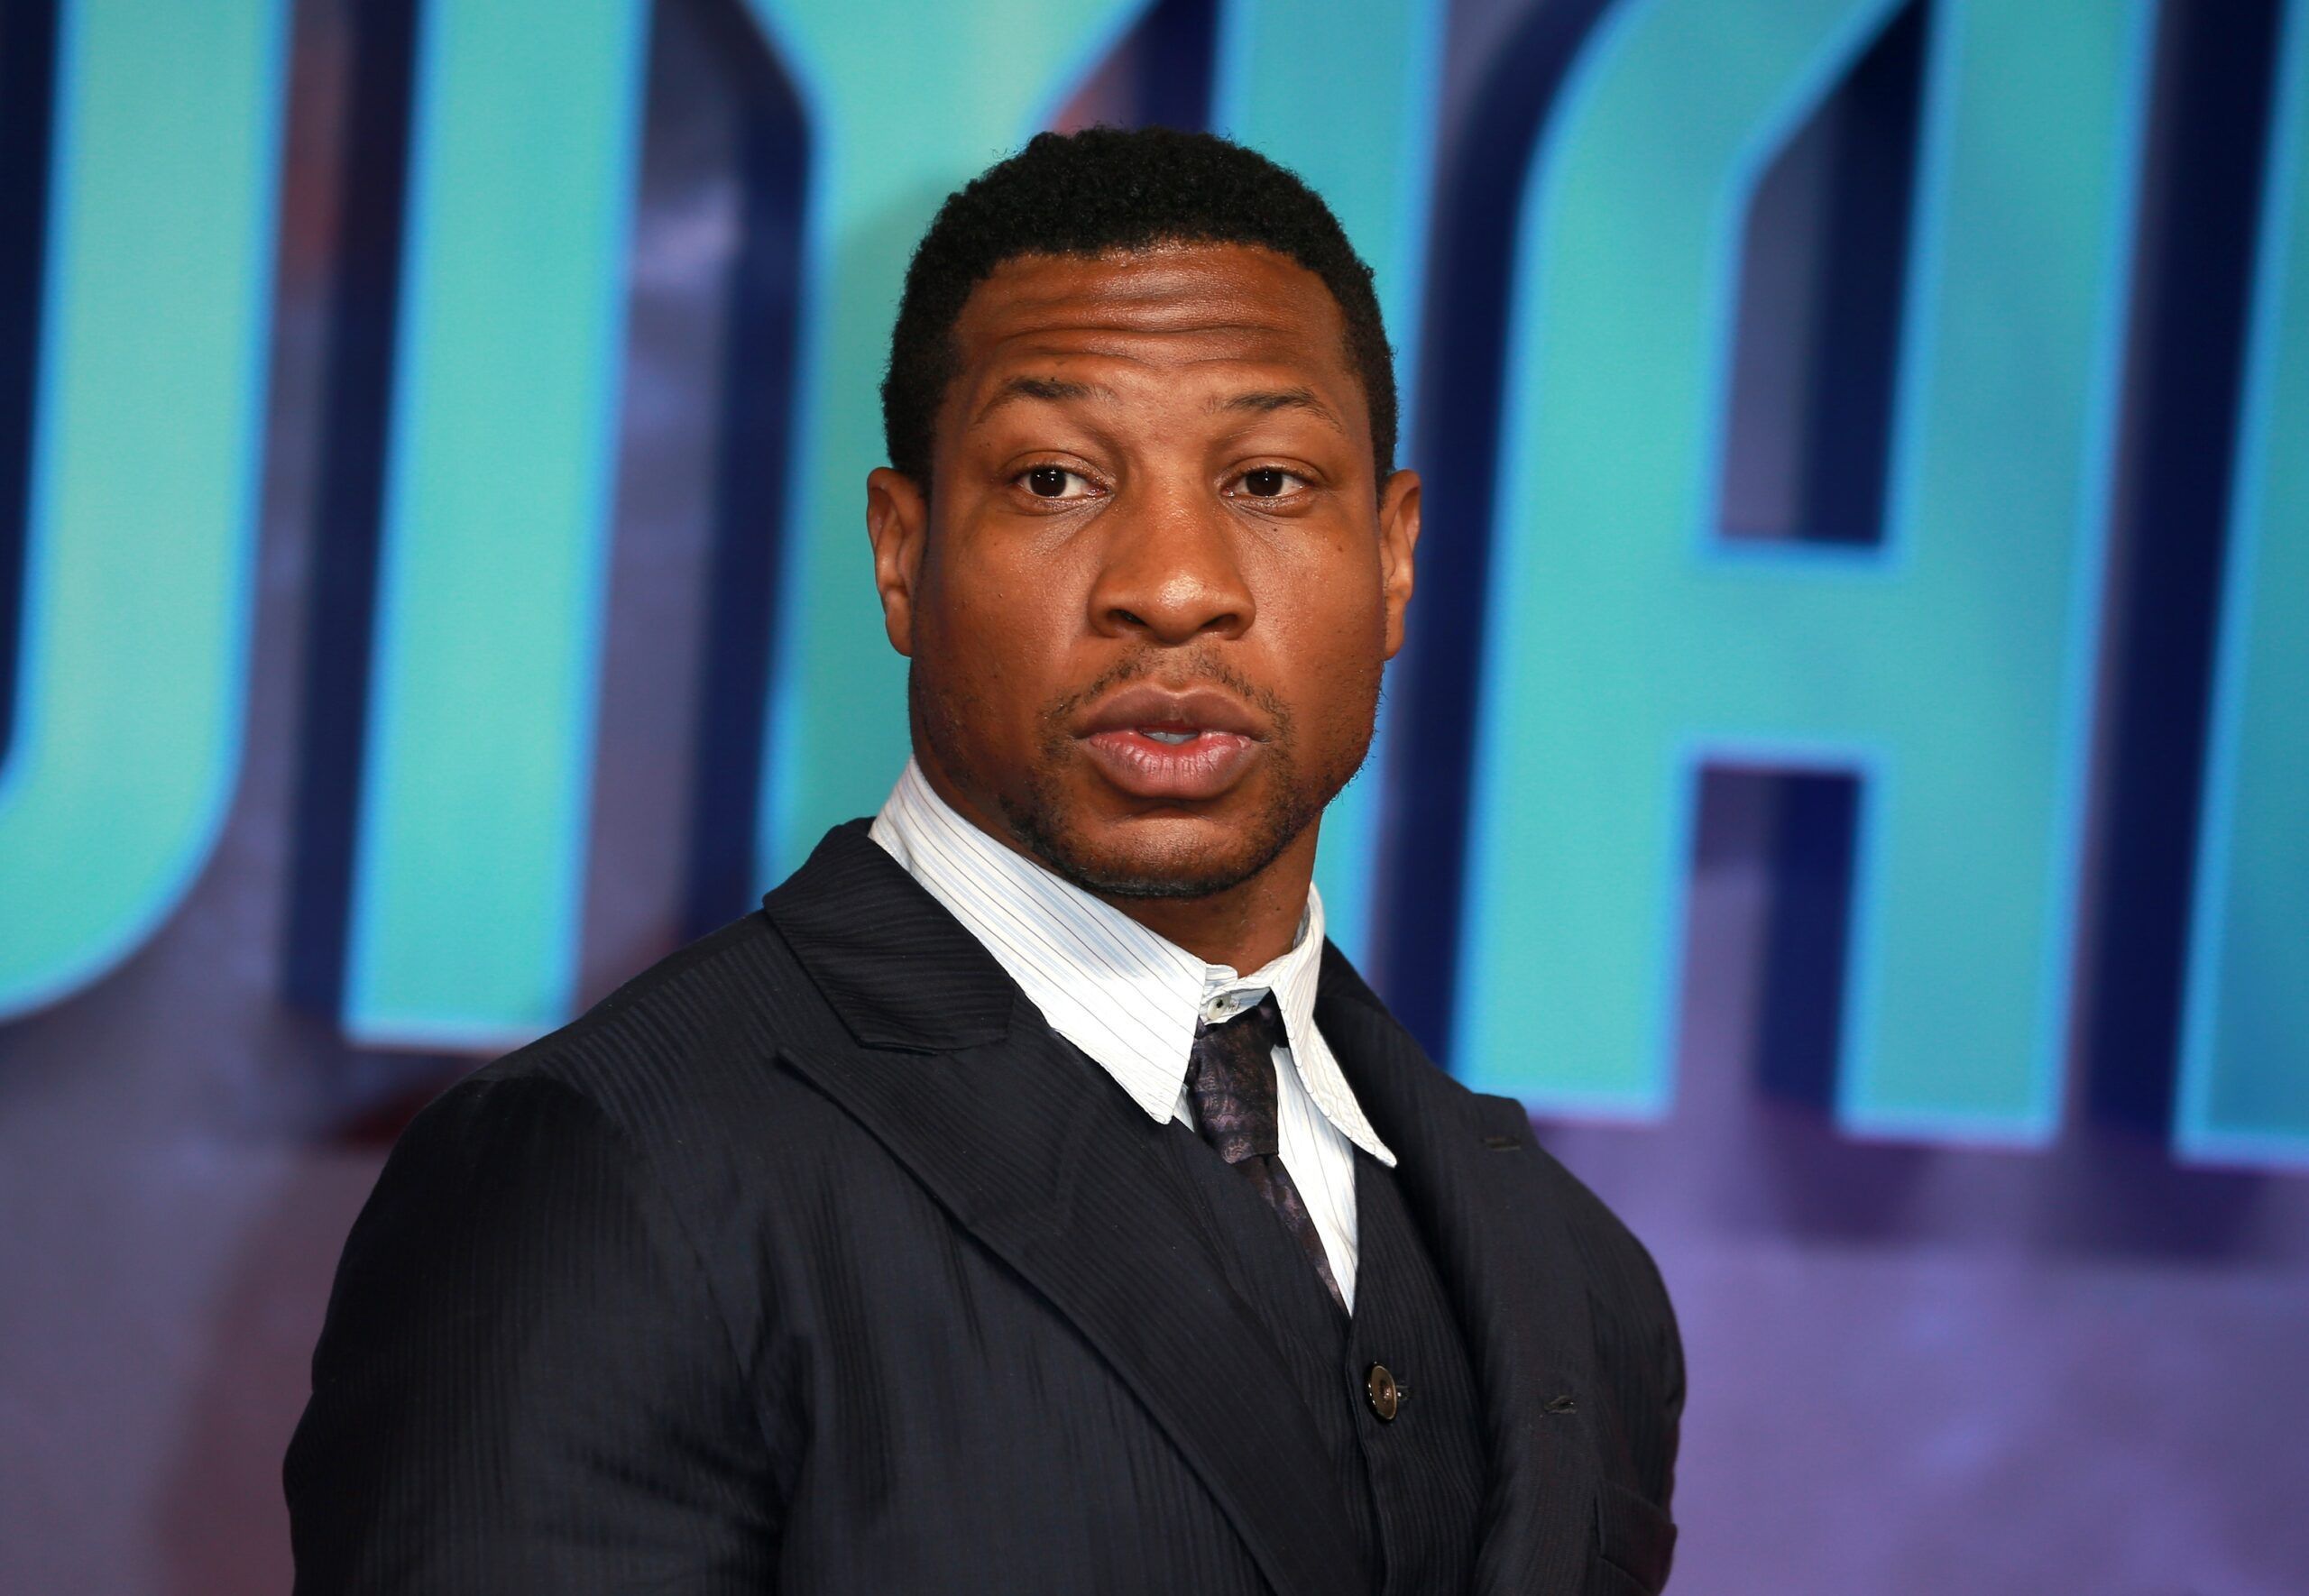 Jonathan Majors has been found guilty of assaulting his British ex-girlfriend. Credit: Fred Duval / Shutterstock.com